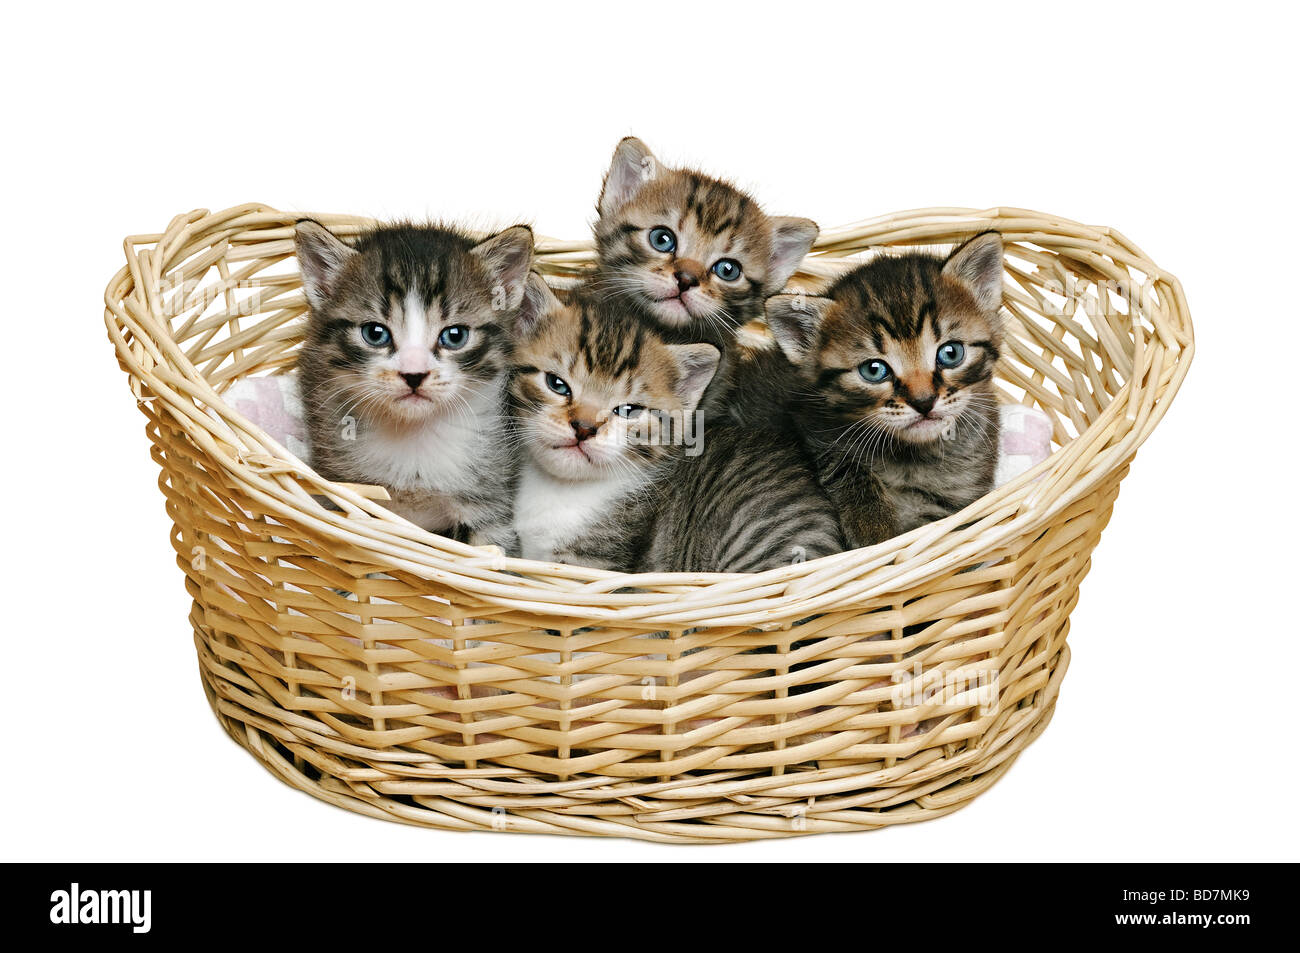 Kittens in a Basket Cut Out Stock Photo